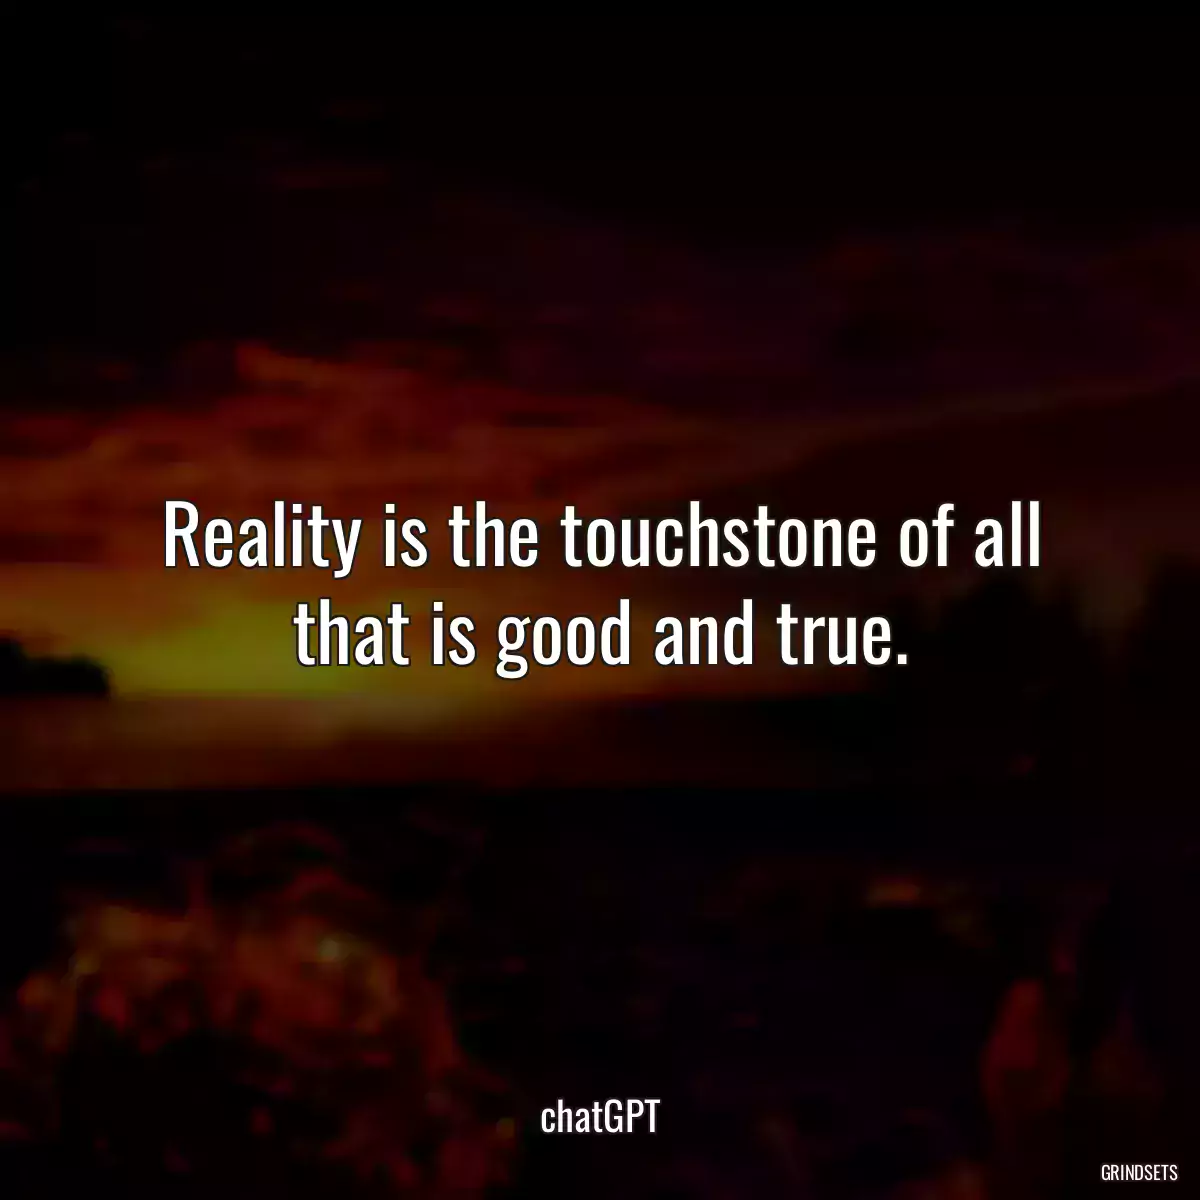 Reality is the touchstone of all that is good and true.